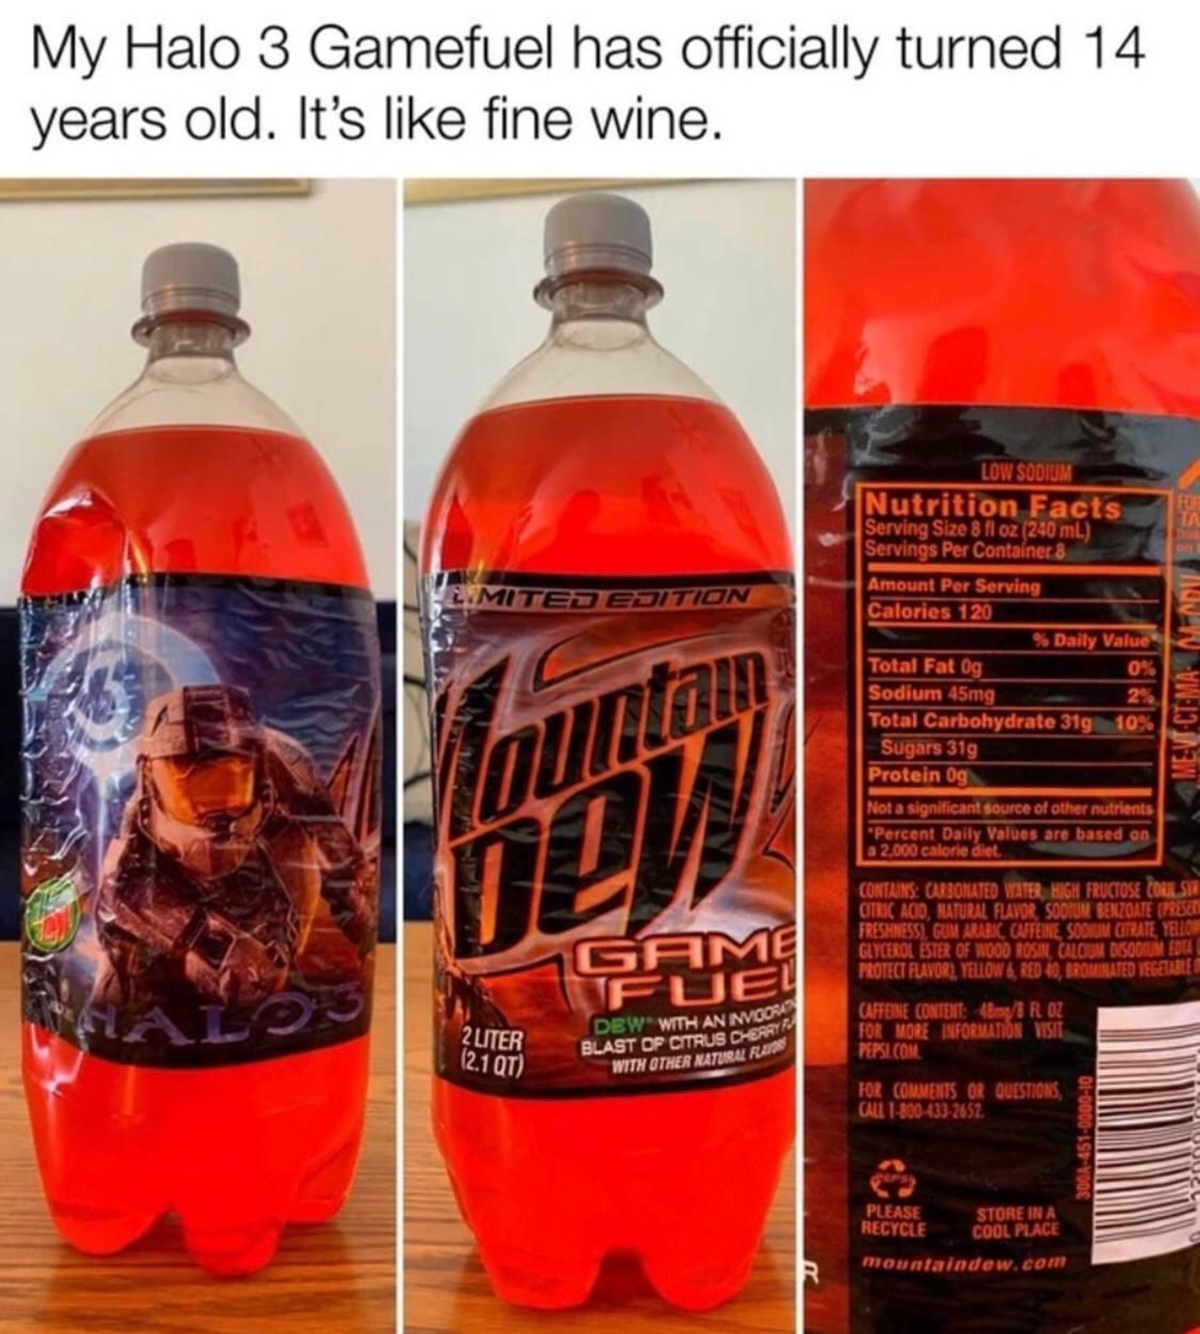 dank memes - halo 3 game fuel - My Halo 3 Gamefuel has officially turned 14 years old. It's fine wine. Mited Edition Fourtan new 2UTER 2.10T Game Fuel Dew With An No Blast Of Otrue Che With The Natural A Low Sooum Nutrition Facts Serving Size 8 or 240 m S